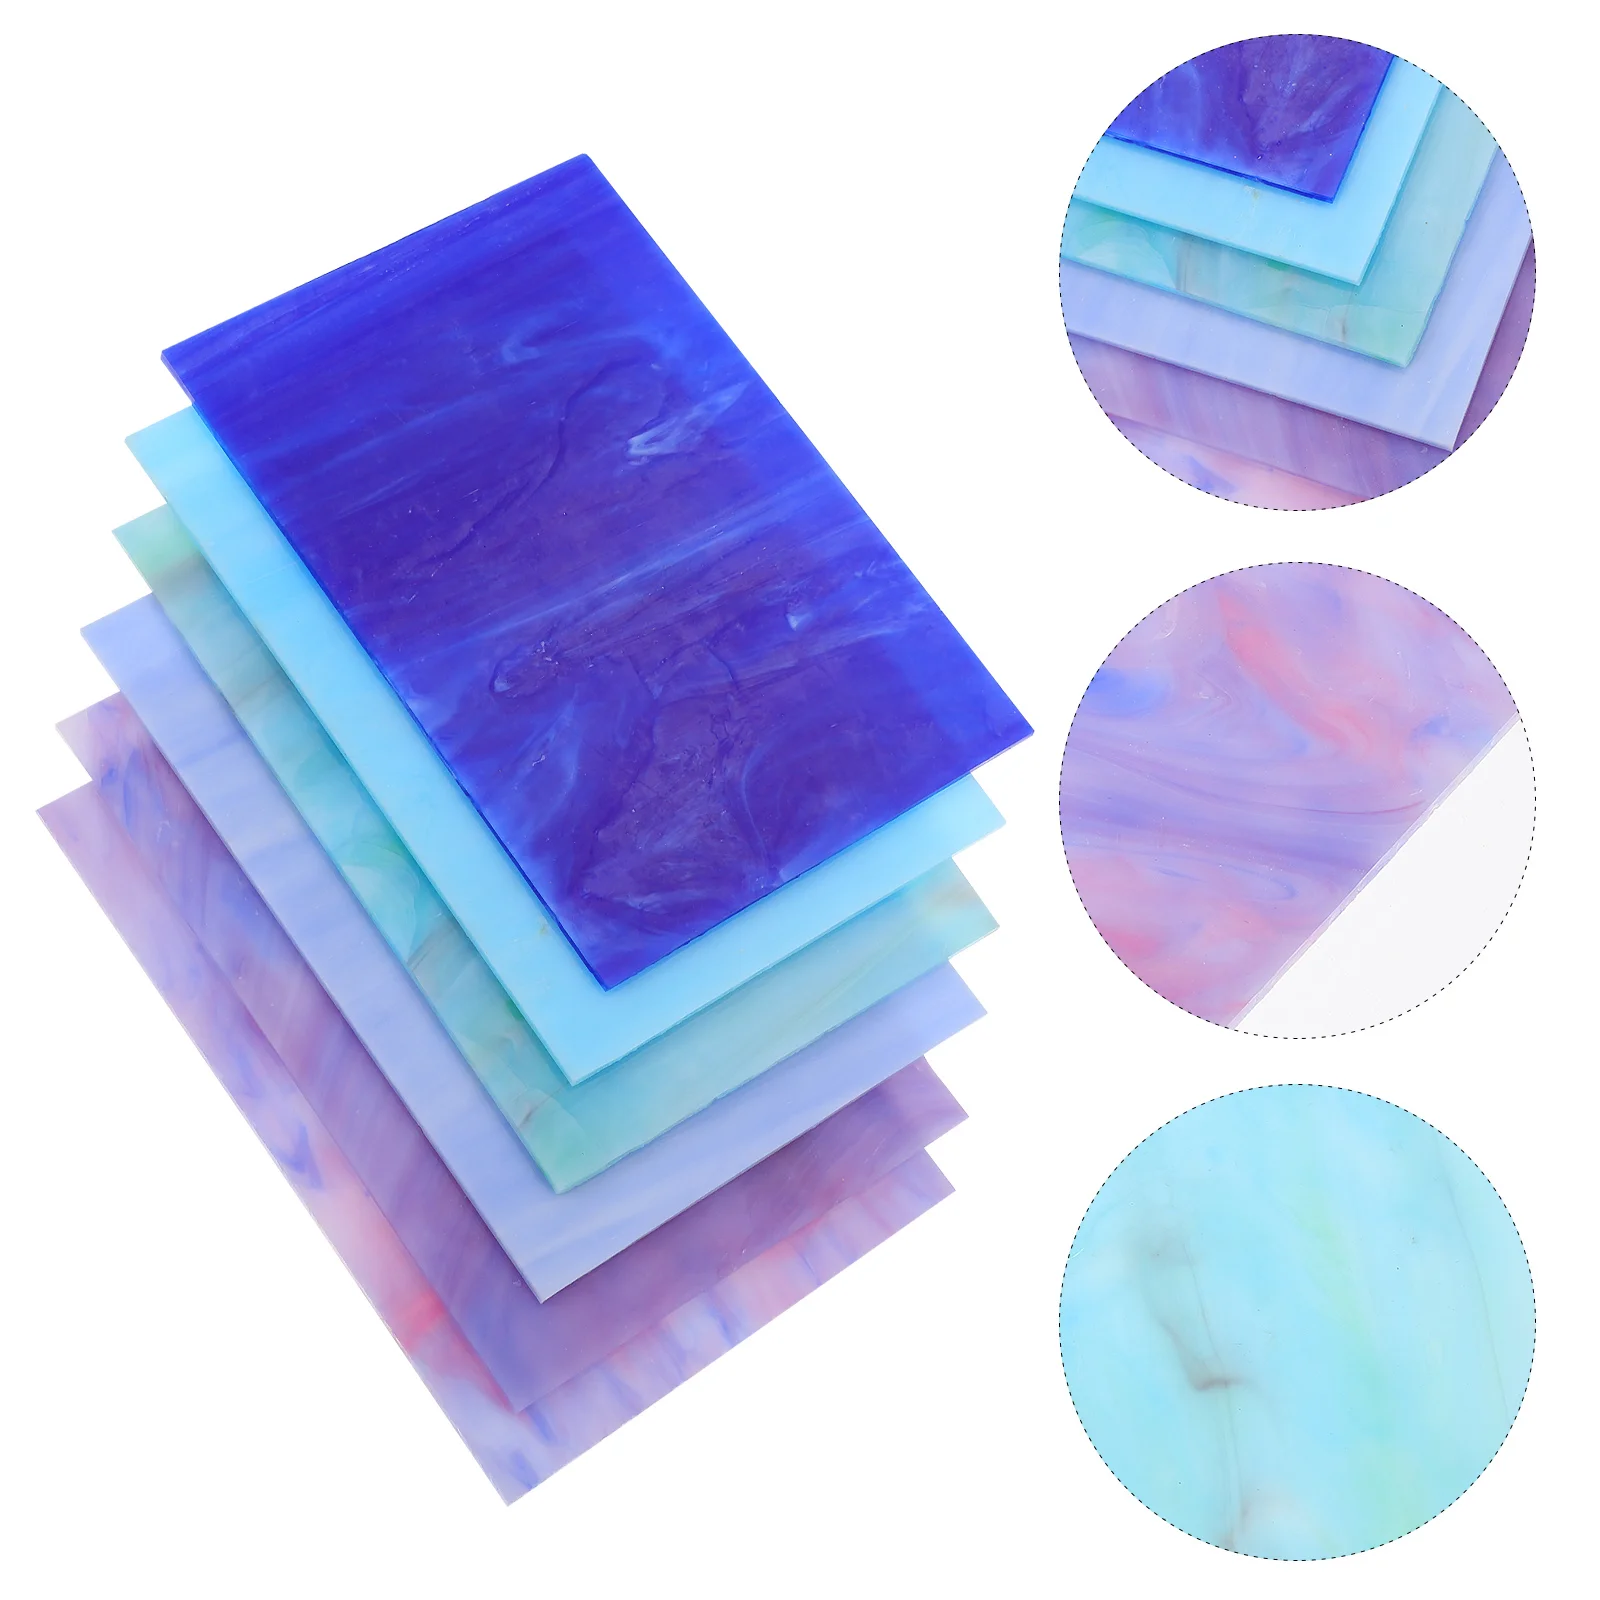 

6 Pcs Colored Mica Flakes Mosaic Stained Glass Water Ripple Sheet Cathedral Student Colorful Candlesticks Supplies